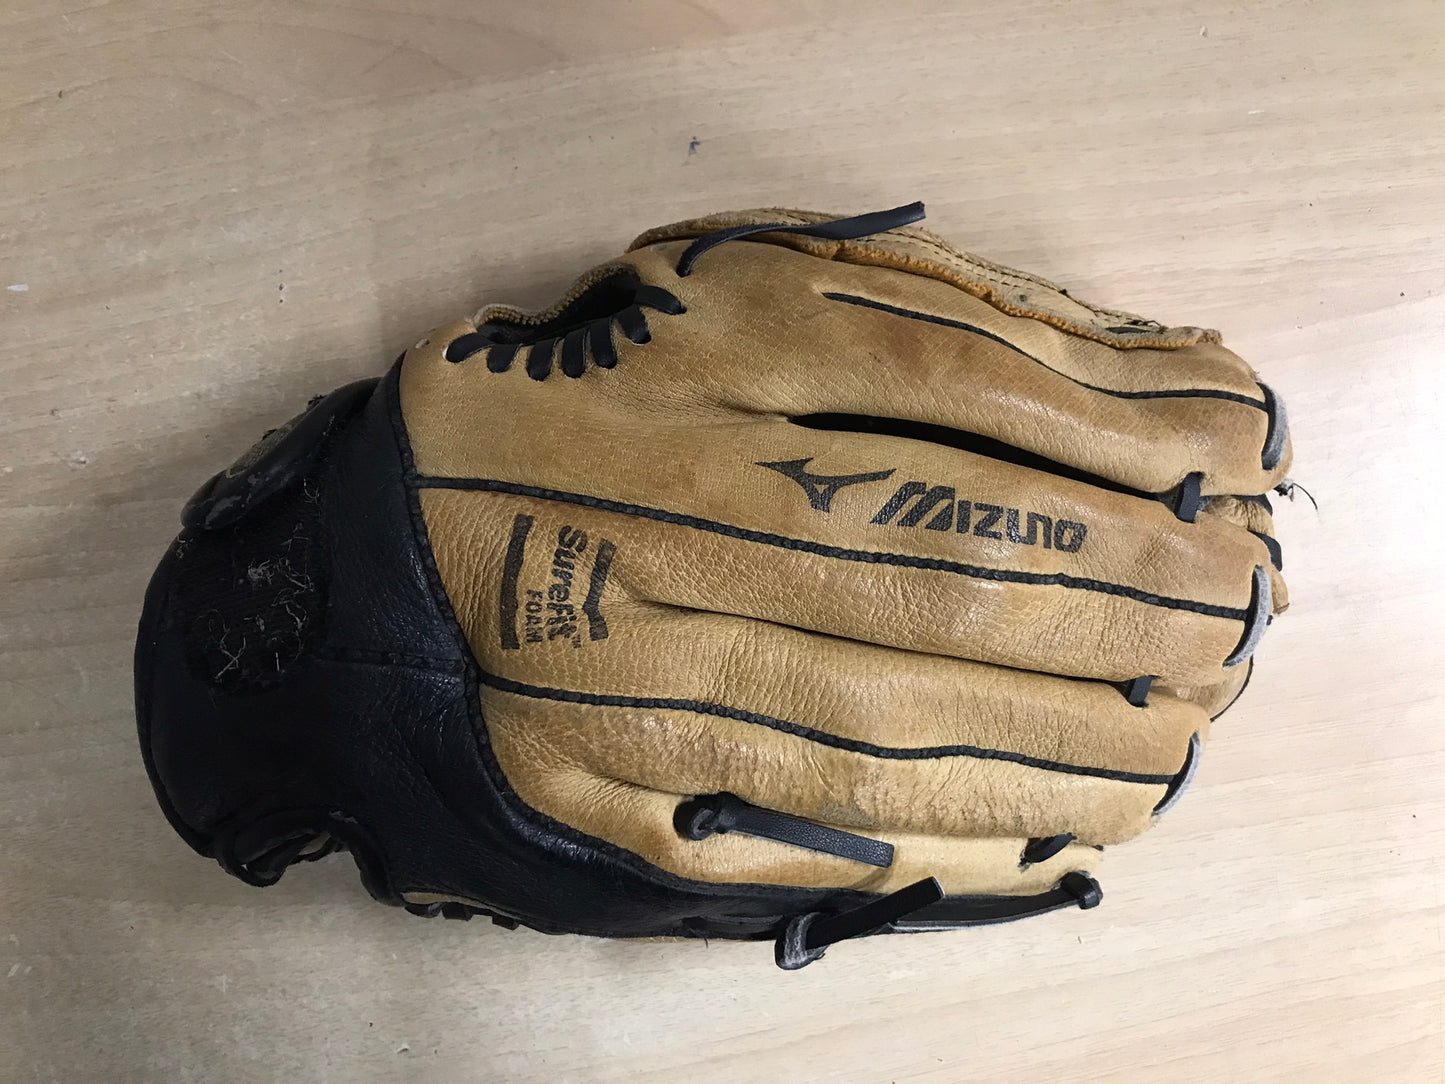 Baseball Glove Adult Size 11.5 inch Mizuno Tan Black Leather Fits on RIGHT Hand